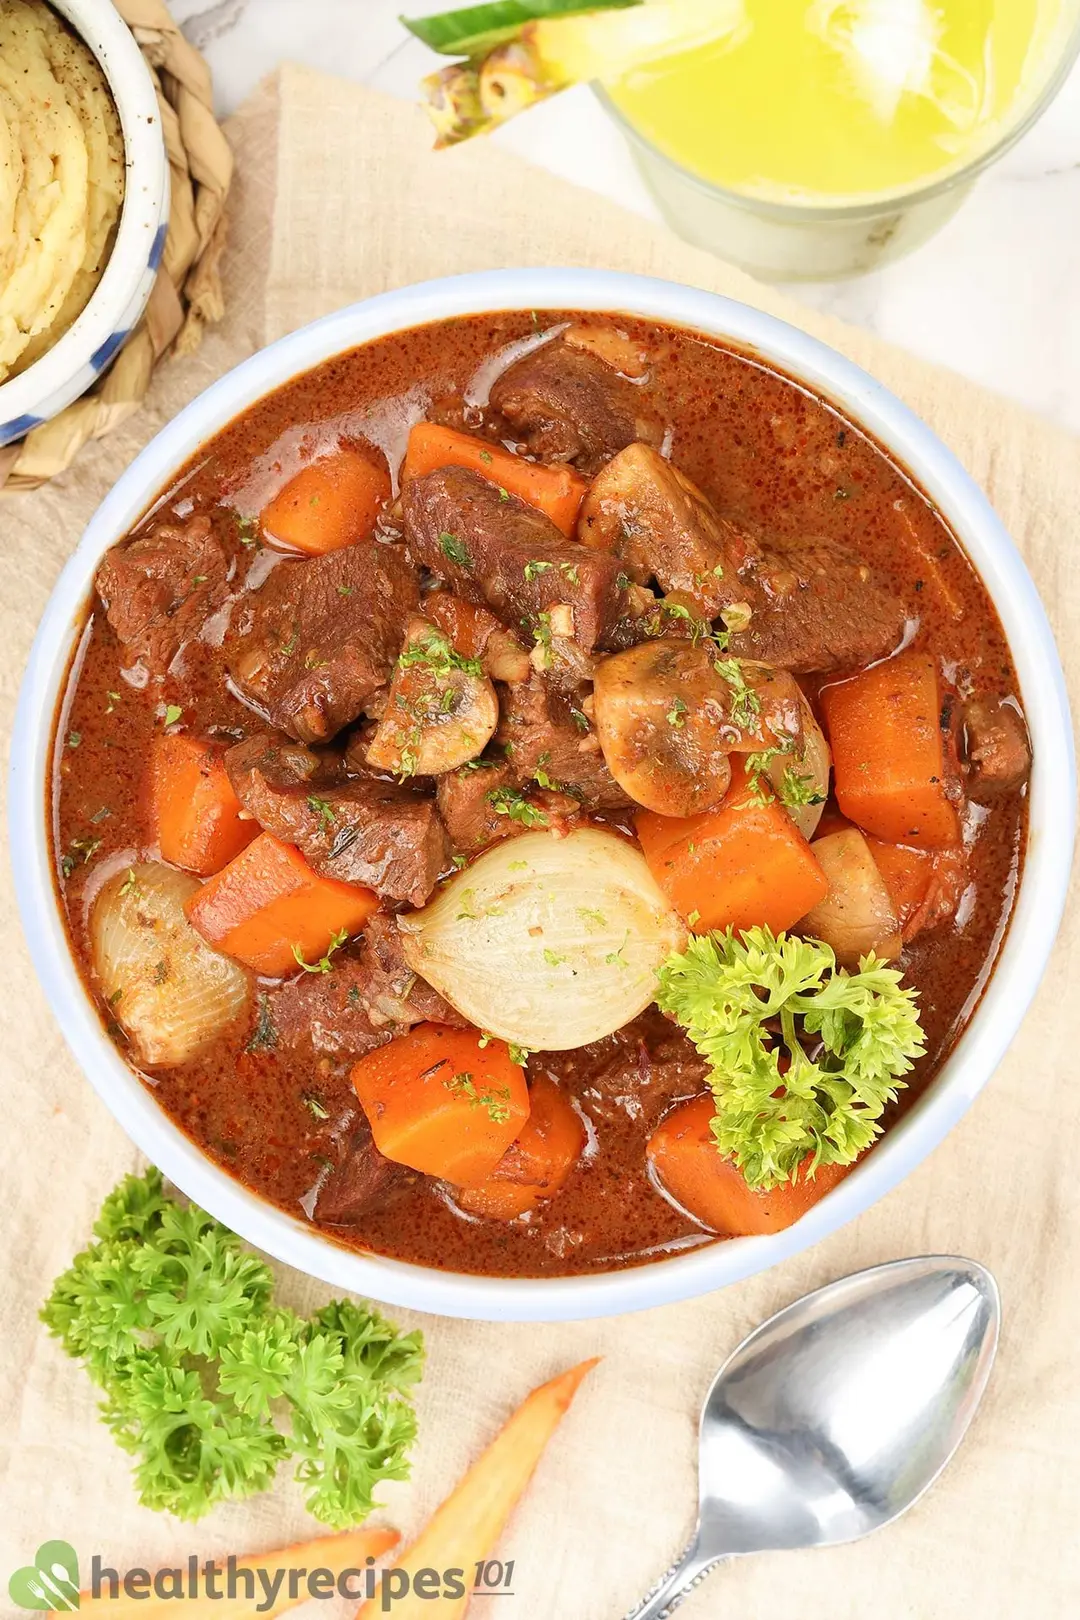 A high-angle shot of a beef stew bowl consisting of a dark brown liquid, large beef cubes, carrot cubes, potato cubes, and fresh parsley laid near various decorative items